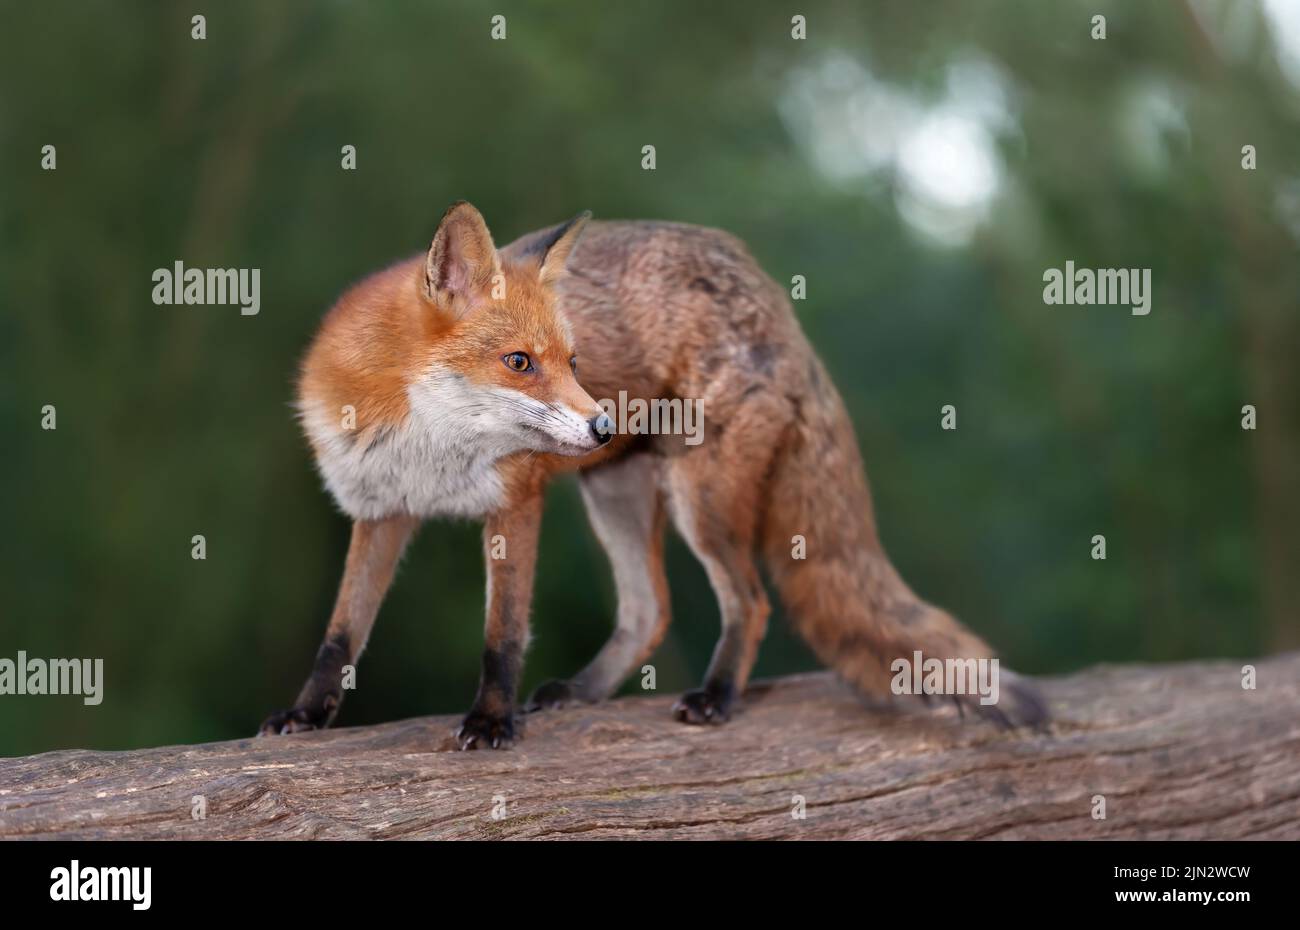 Close up of a Red fox (Vulpes vulpes) on a tree in a forest, UK. Stock Photo